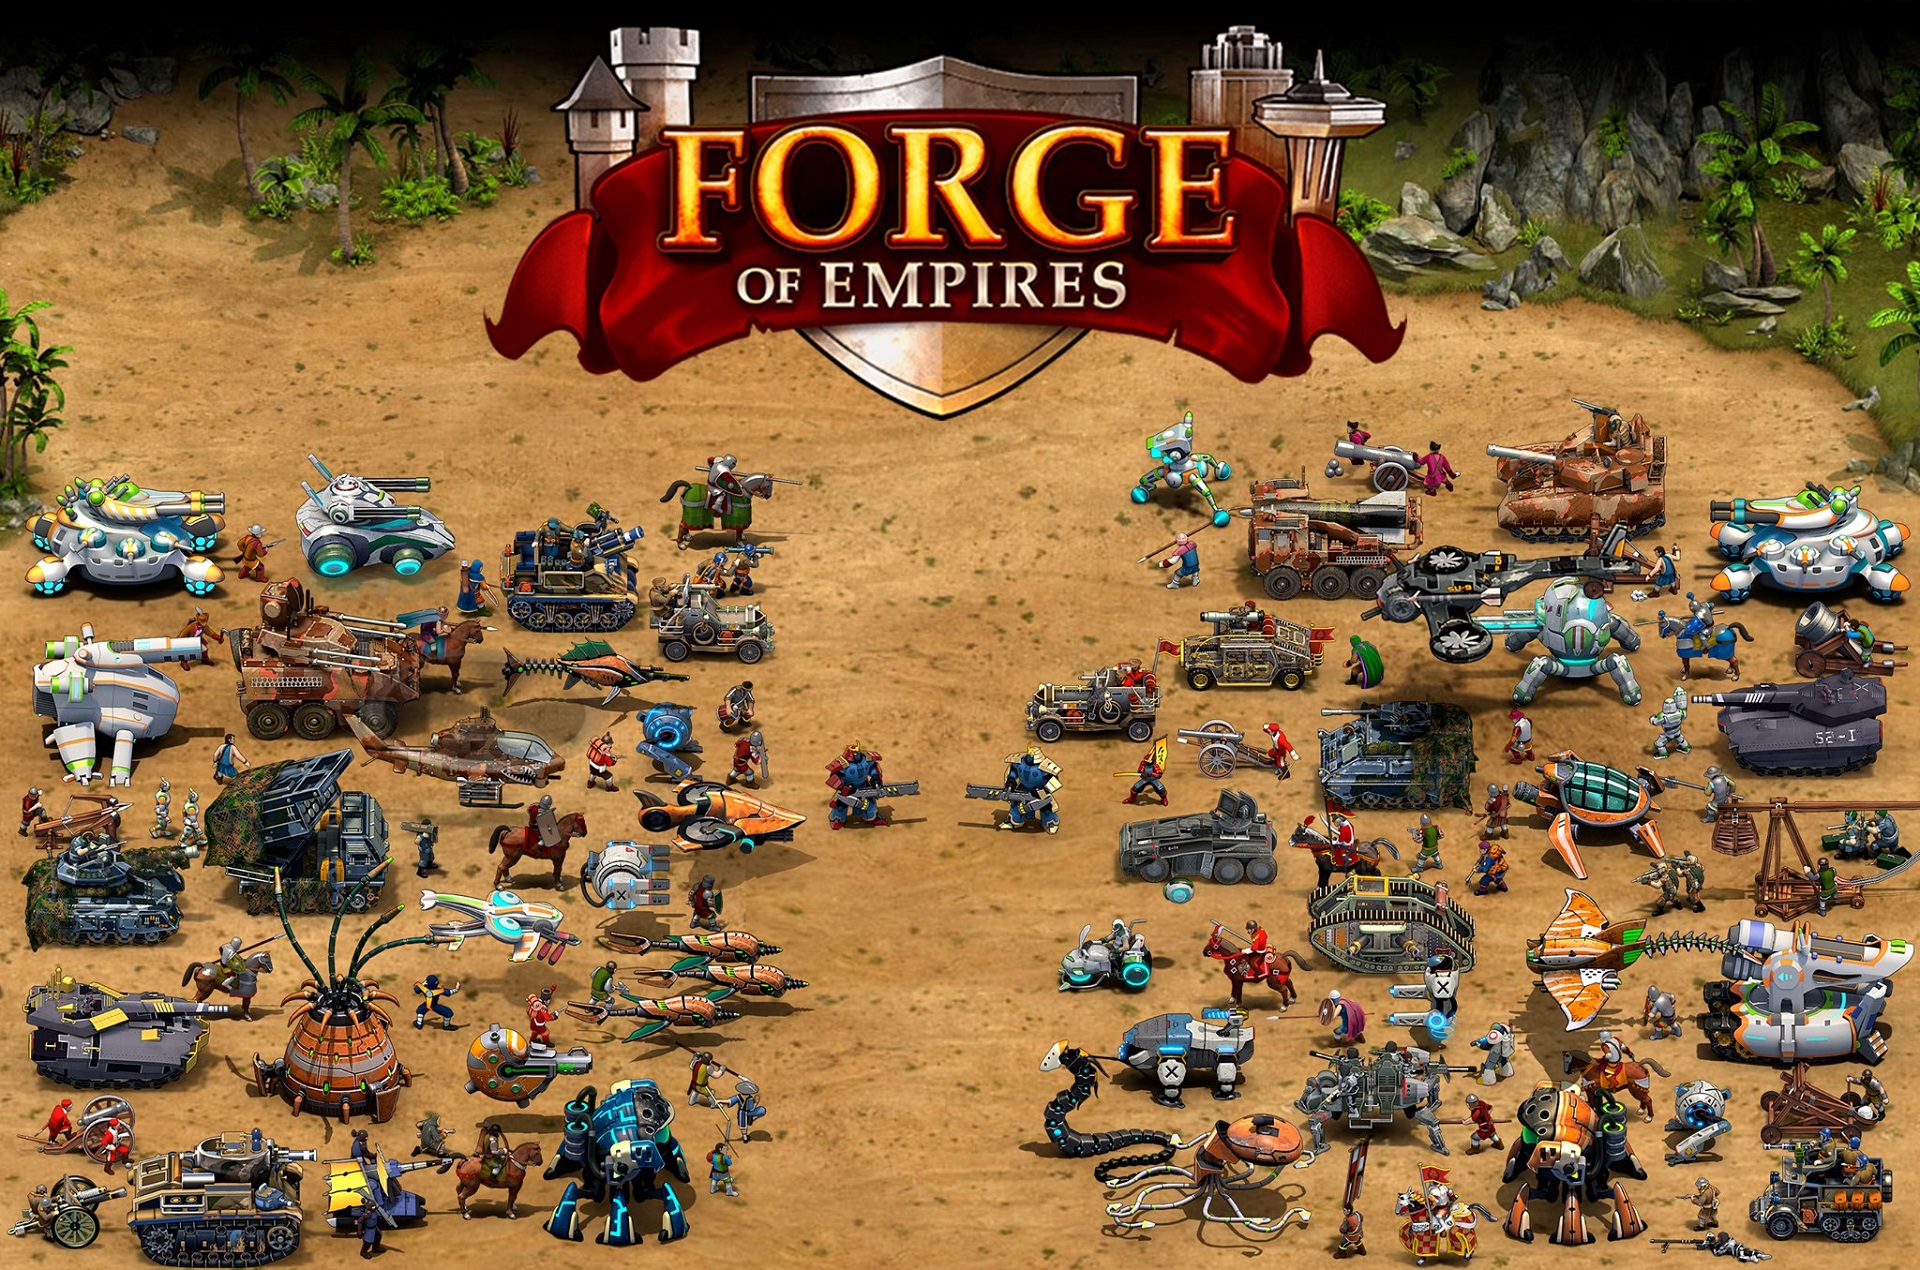 General 1920x1270 Forge of Empires video games video game art video game characters game logo